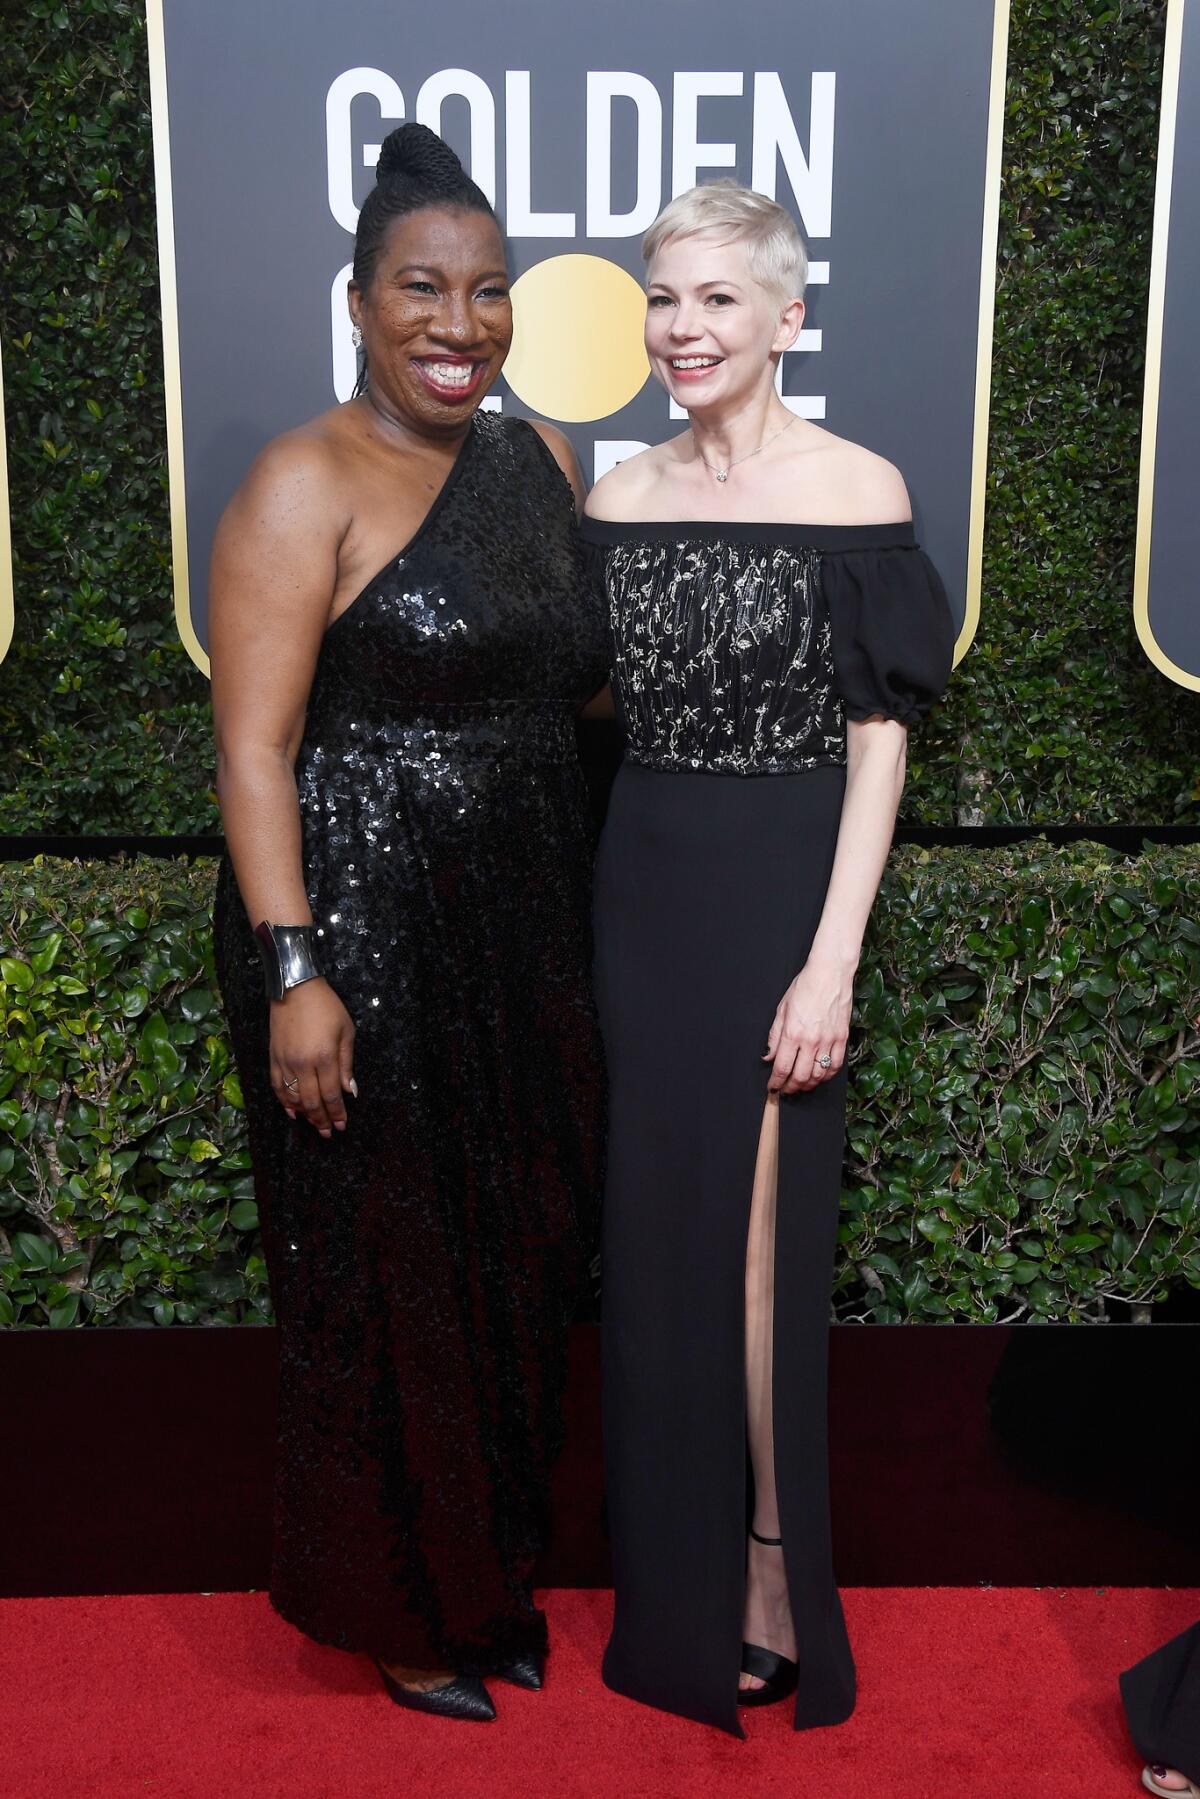 Actress Michelle Williams, right, with activist Tarana Burke, showing support for #MeToo at the 2018 Golden Globe Awards.